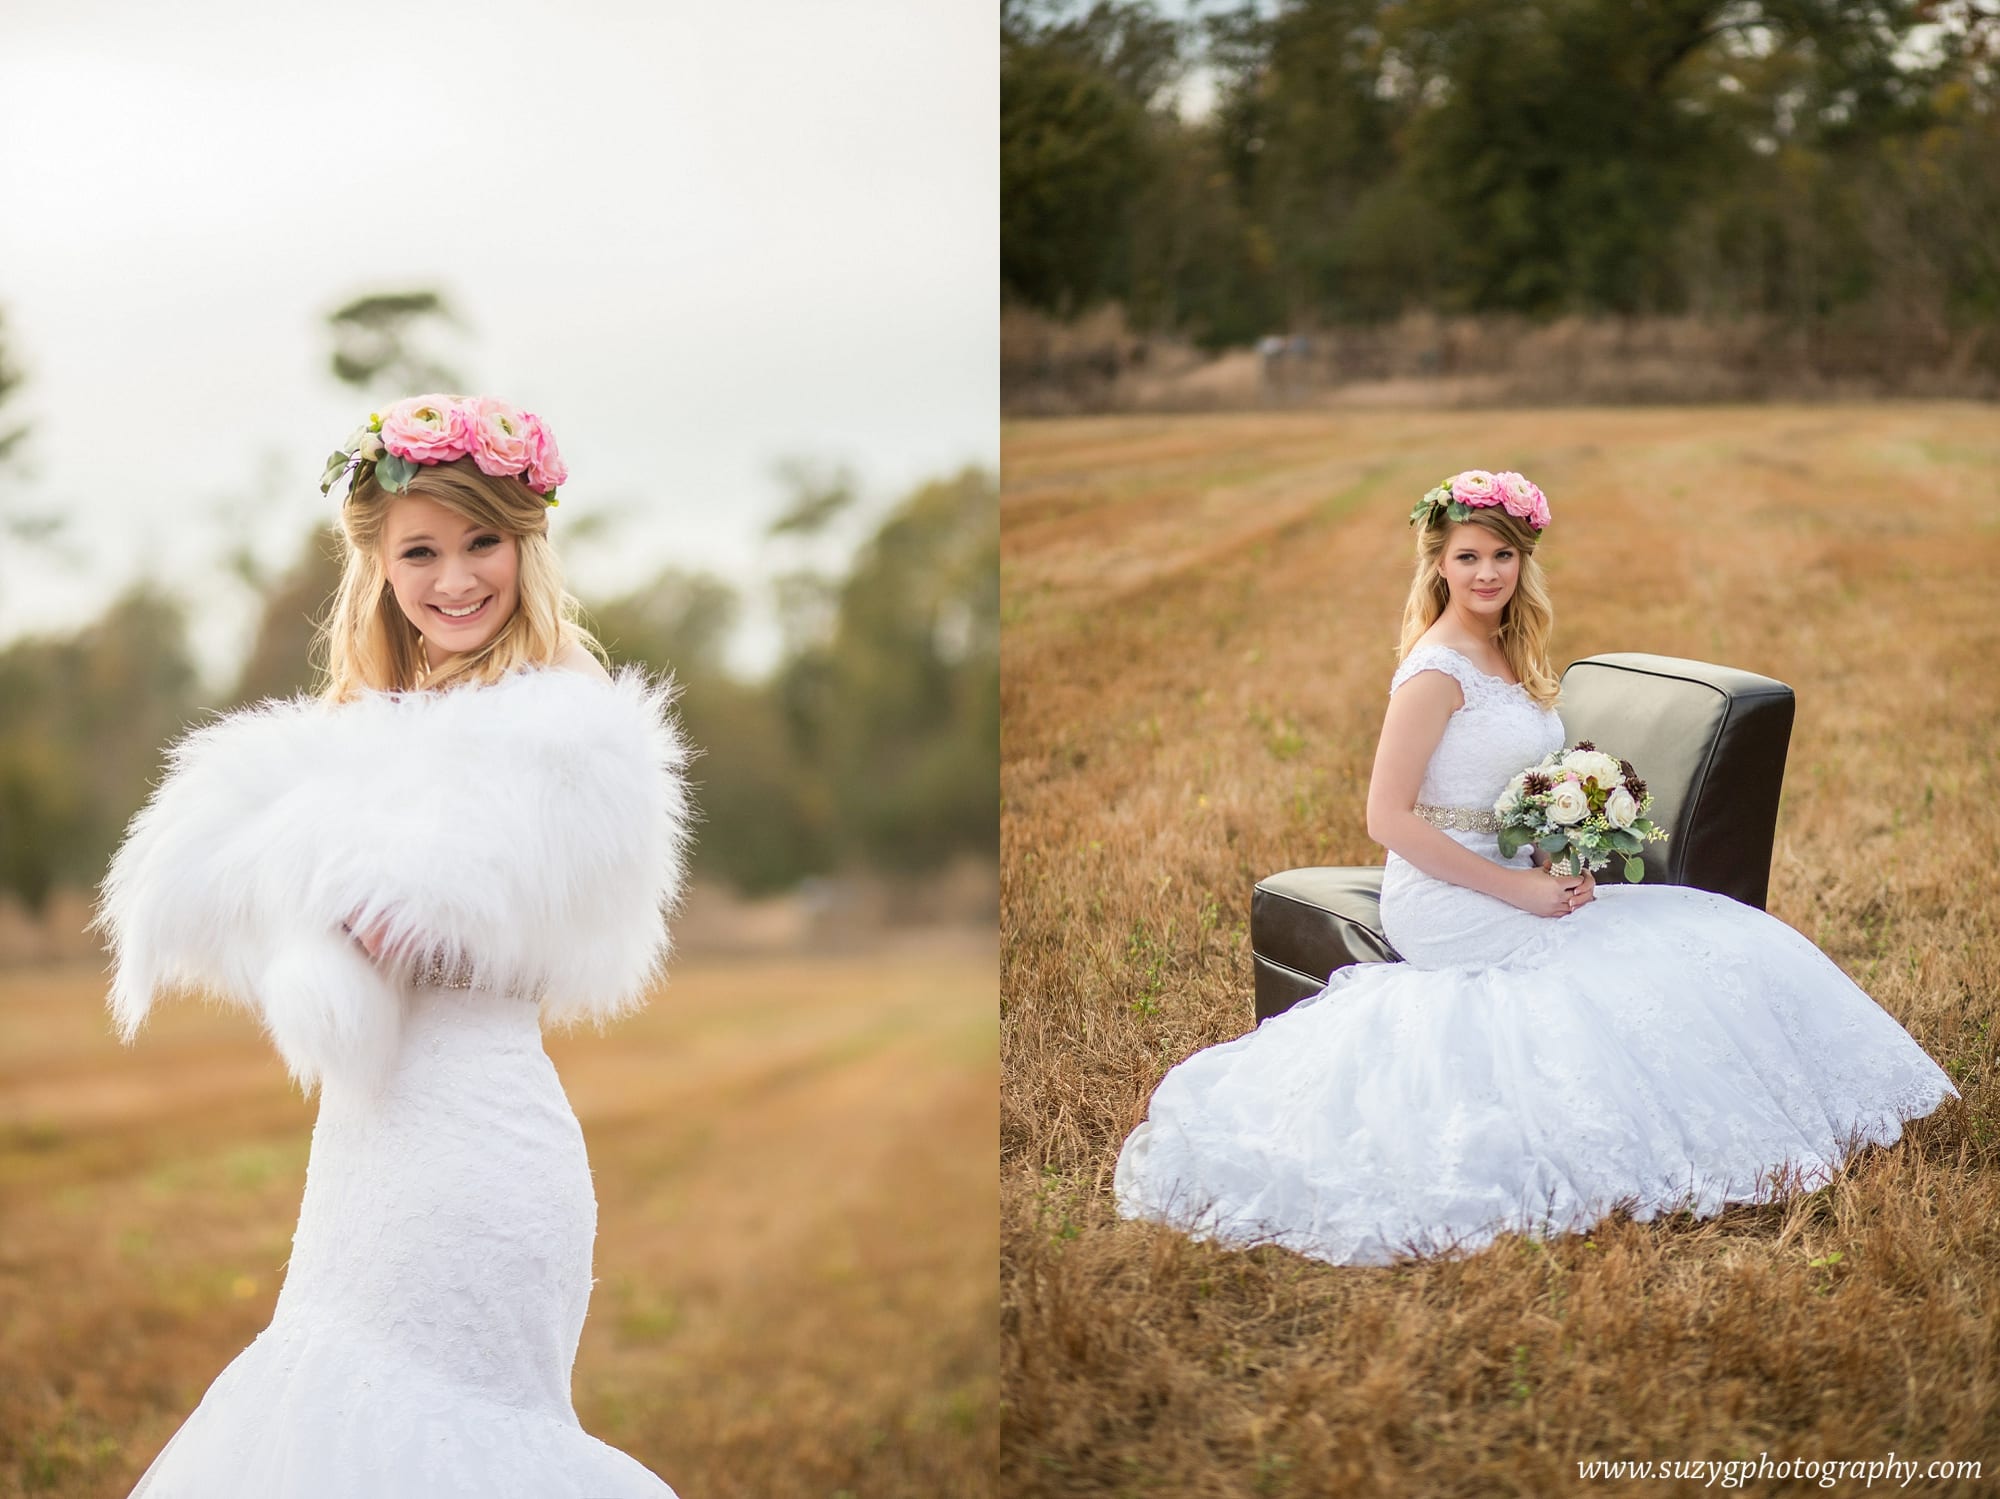 vows by victoria-lake charles-bridal-photography-suzy g-photography-suzygphotography_0007